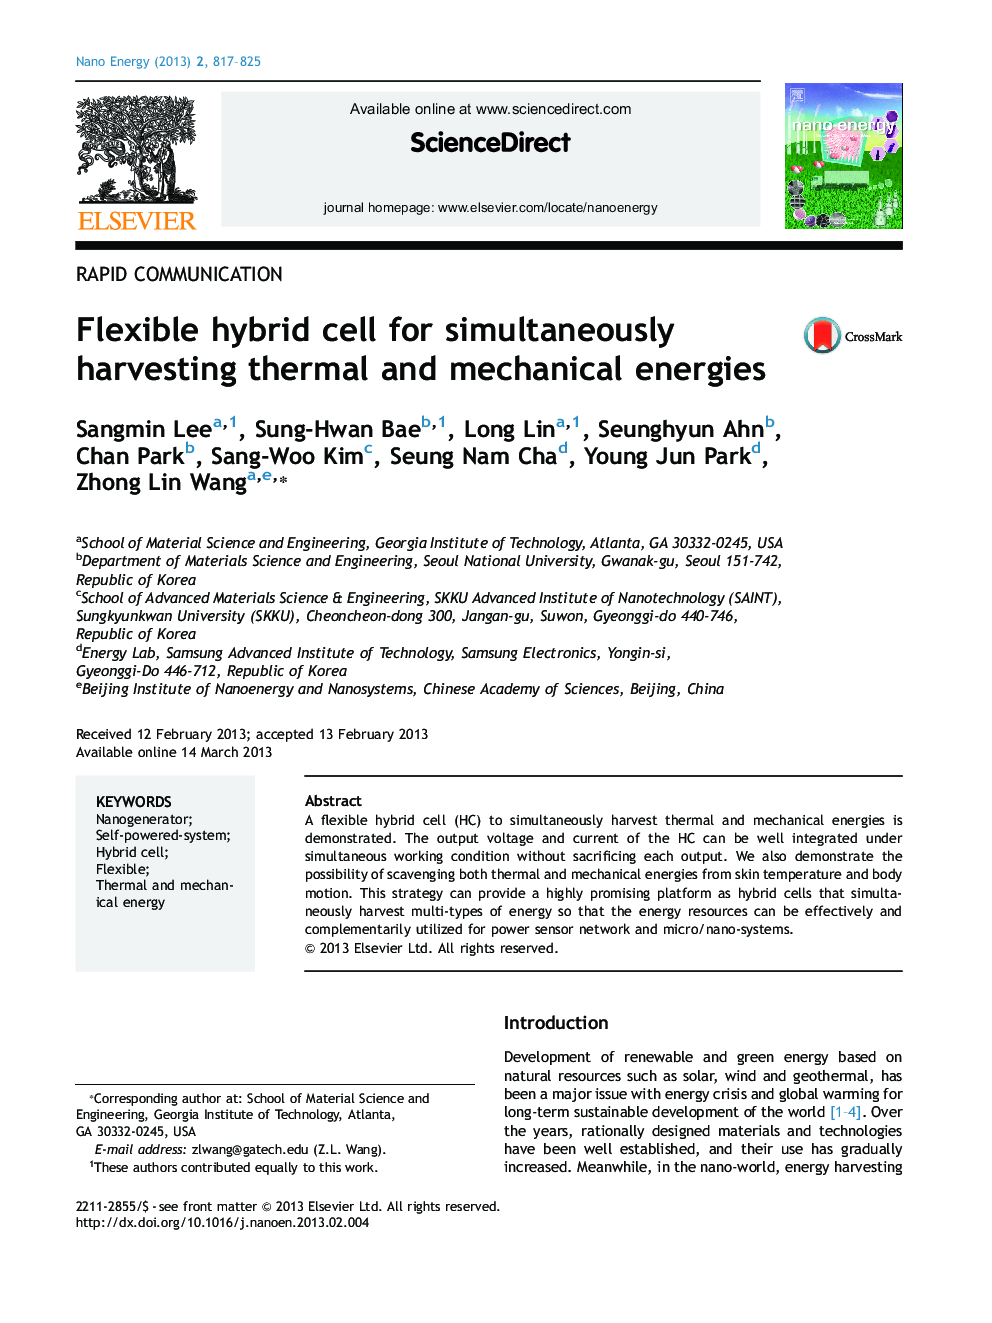 Flexible hybrid cell for simultaneously harvesting thermal and mechanical energies